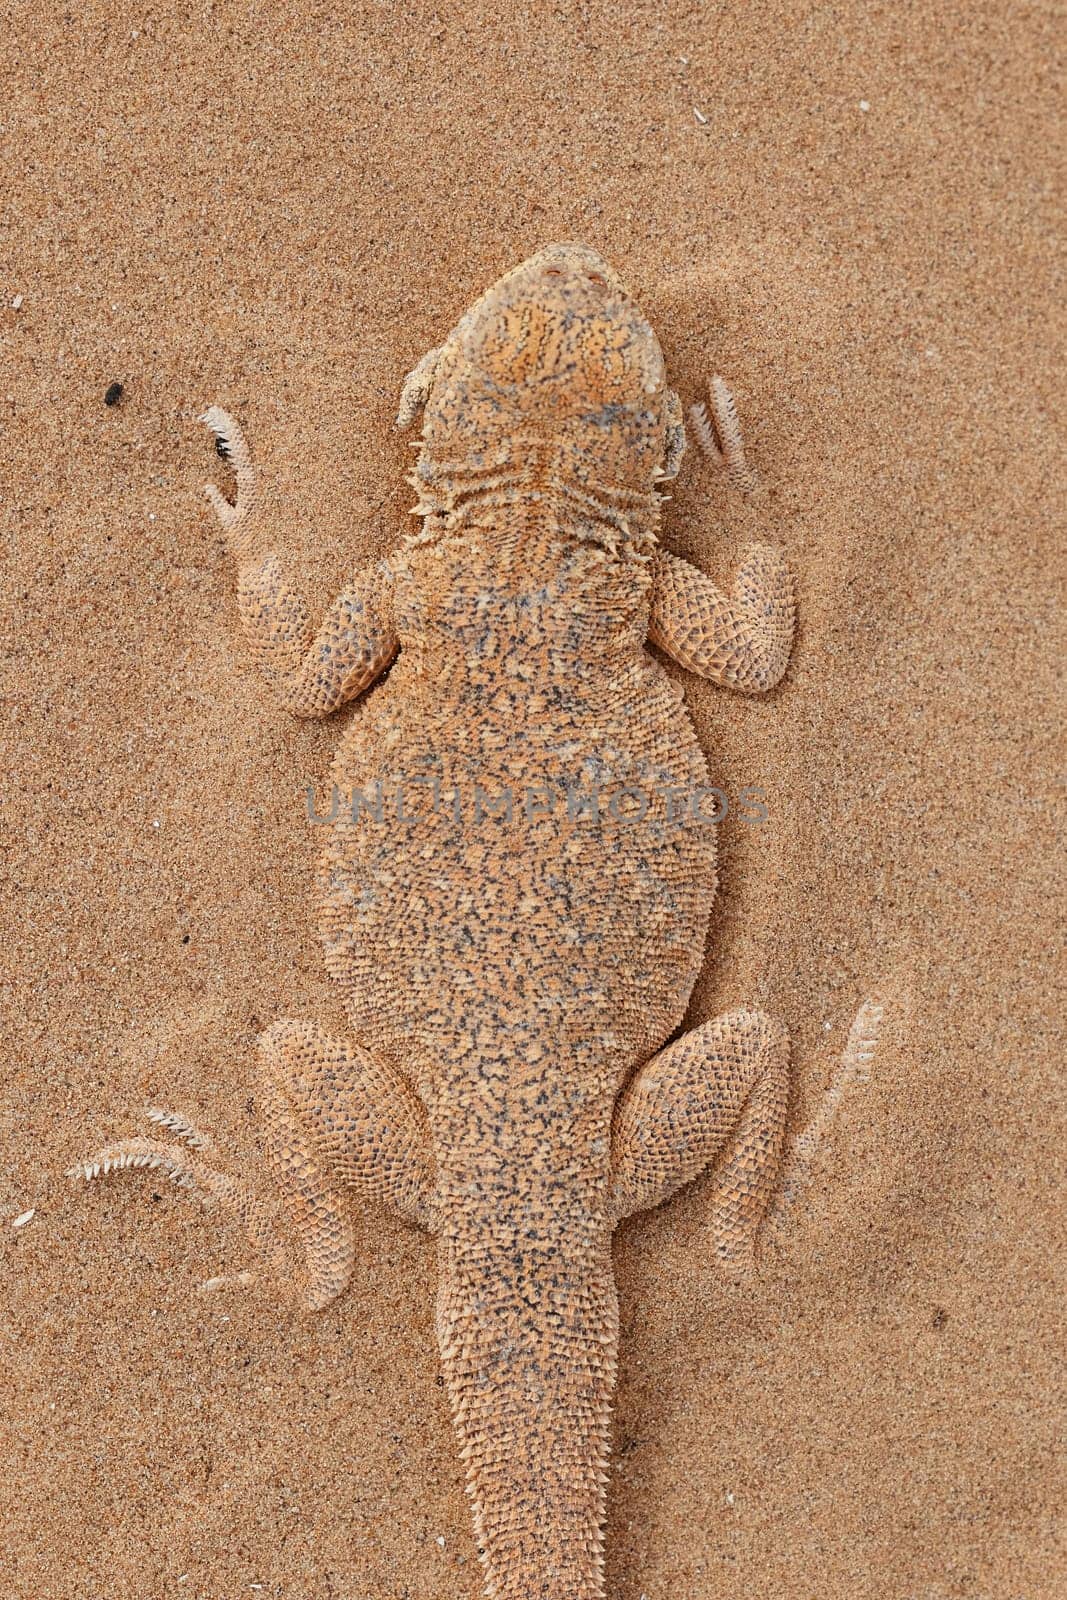 Toad-headed agama Phrynocephalus mystaceus, burrows into the sand in its natural environment. A living dragon of the desert Close up. incredible desert lizard.